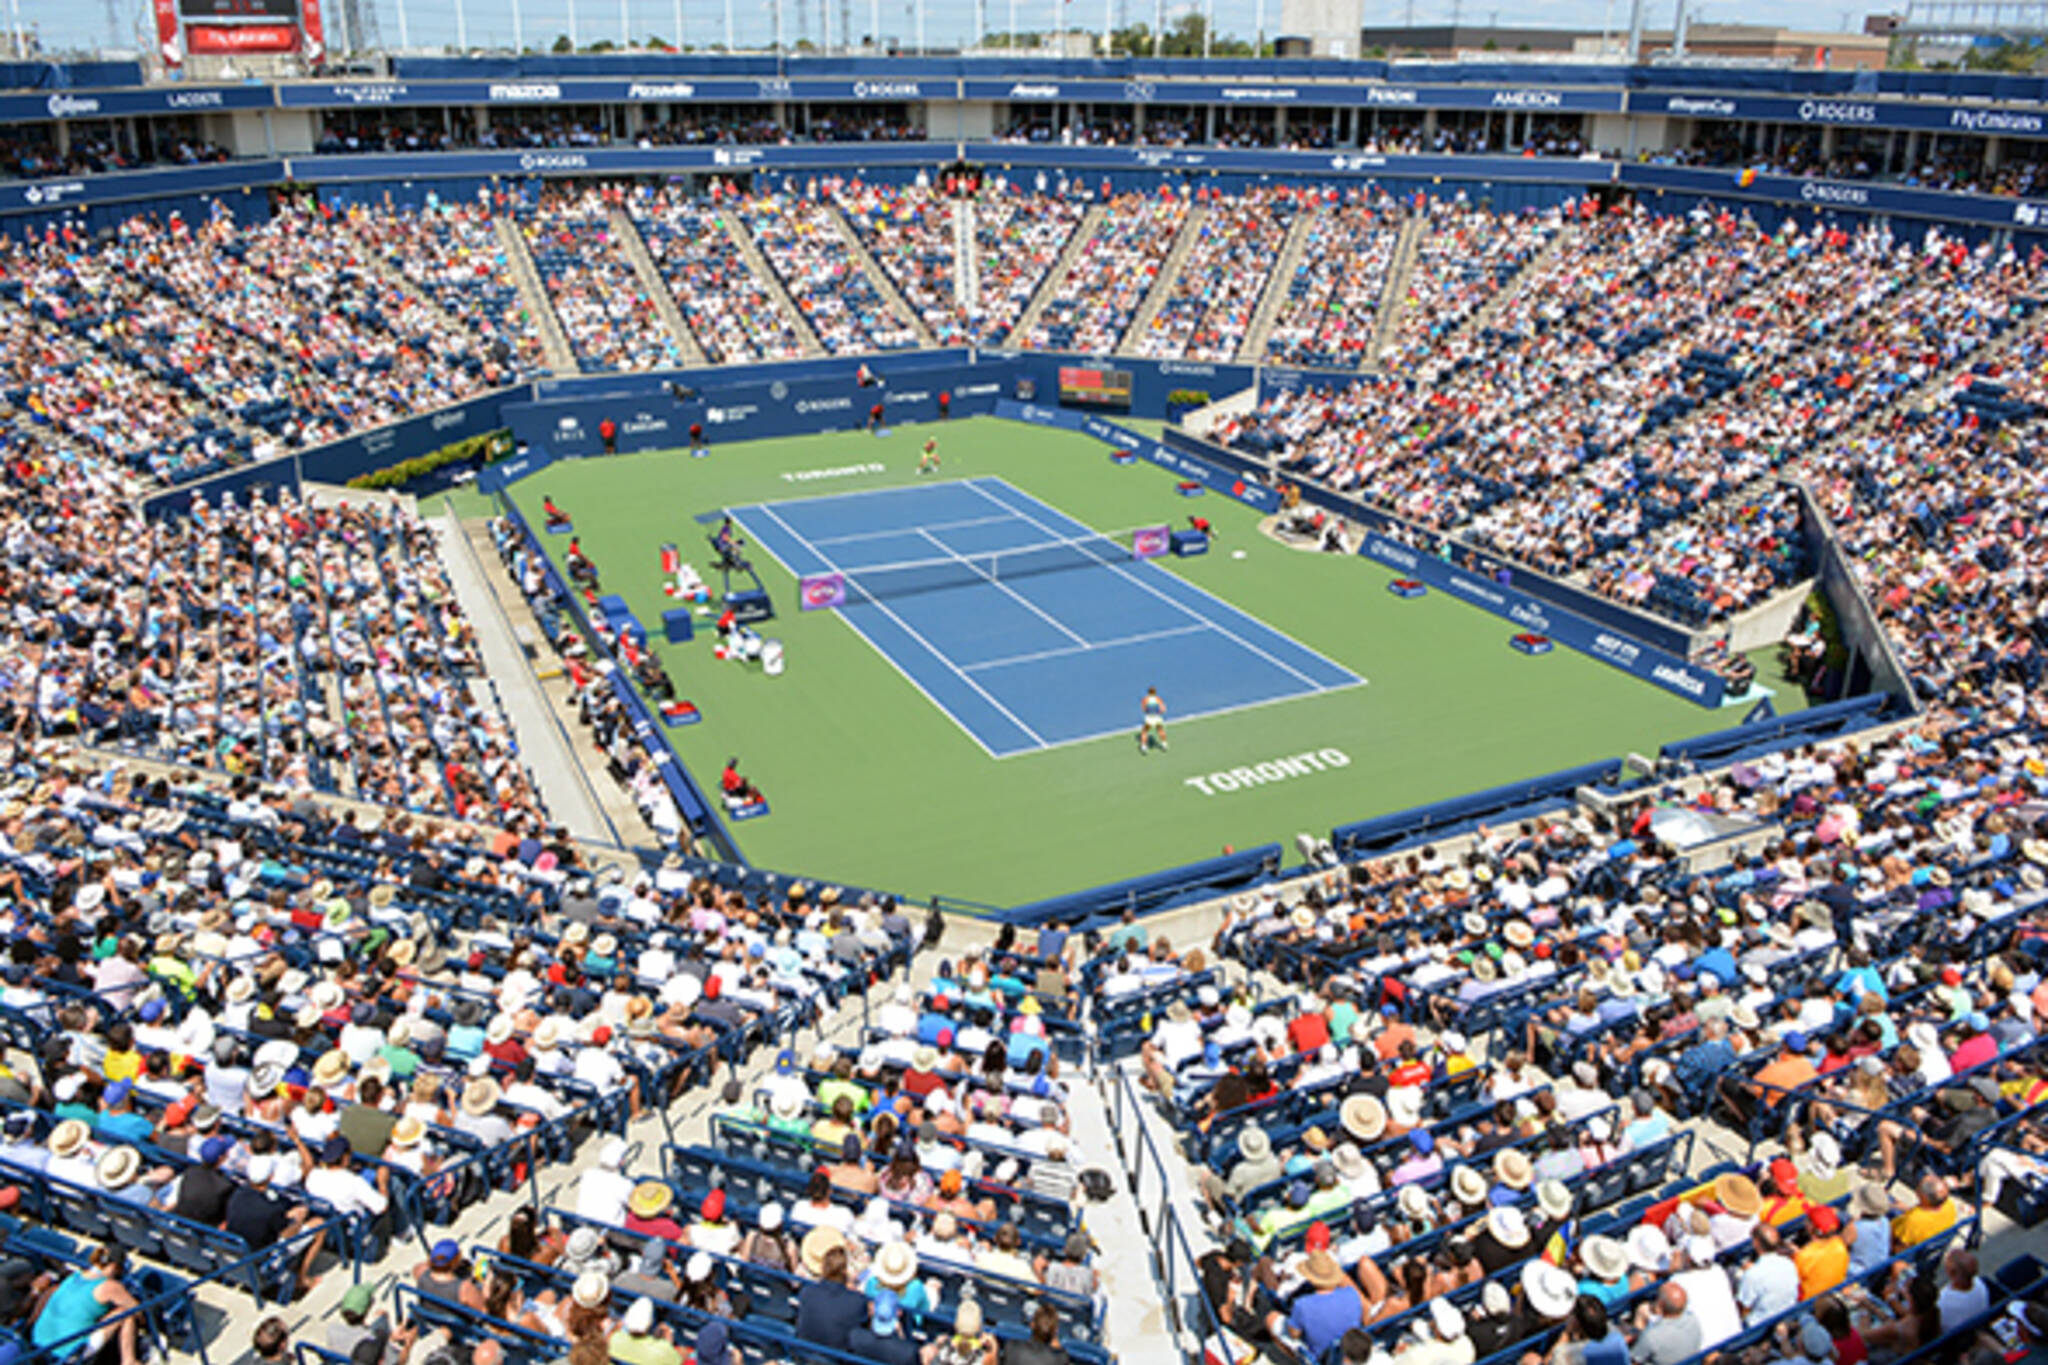 Rogers Cup toronto 2016